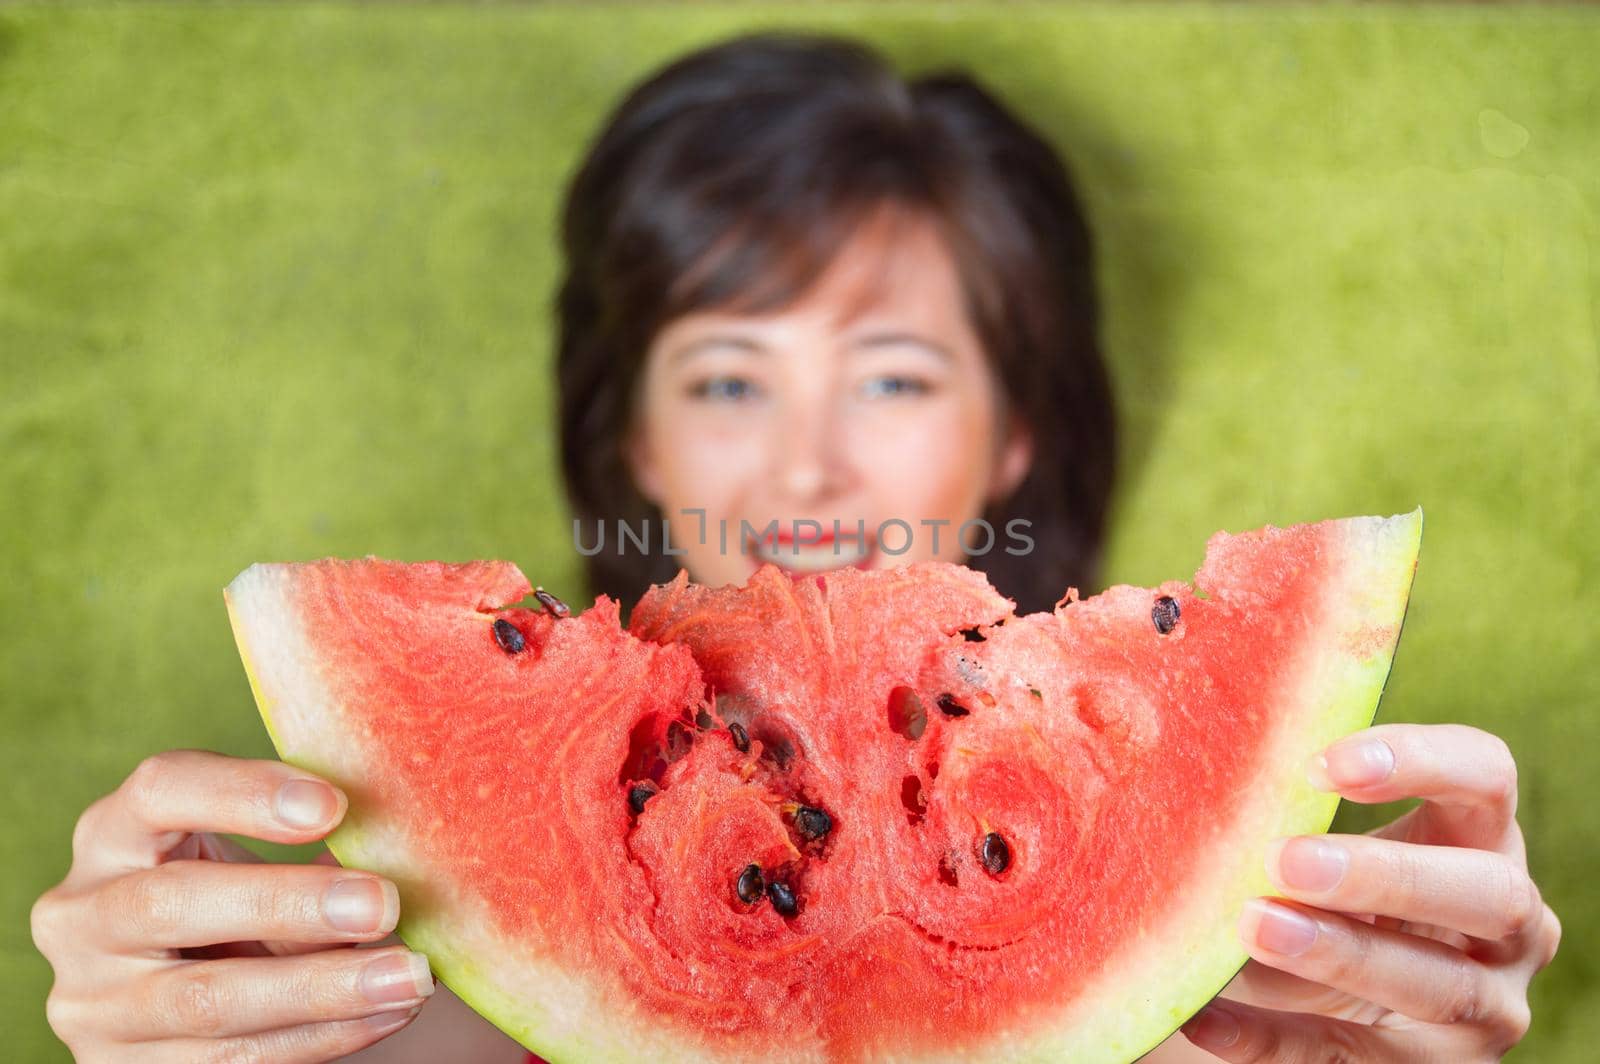 Young woman gives a piece of watermelon, top view, focus on watermelon